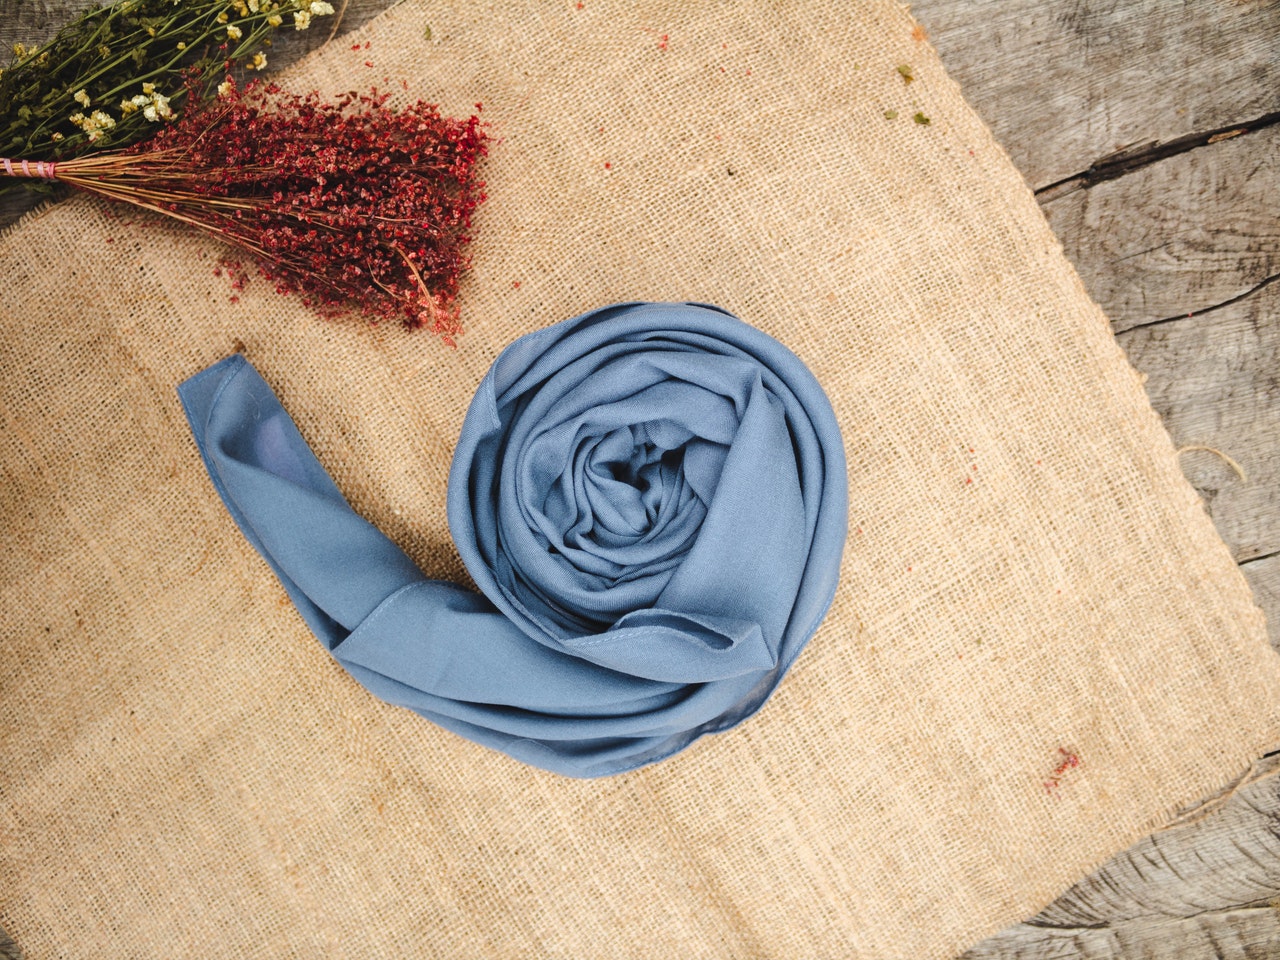 6 Effective Tips to Care for Your Luxury Silk Scarves